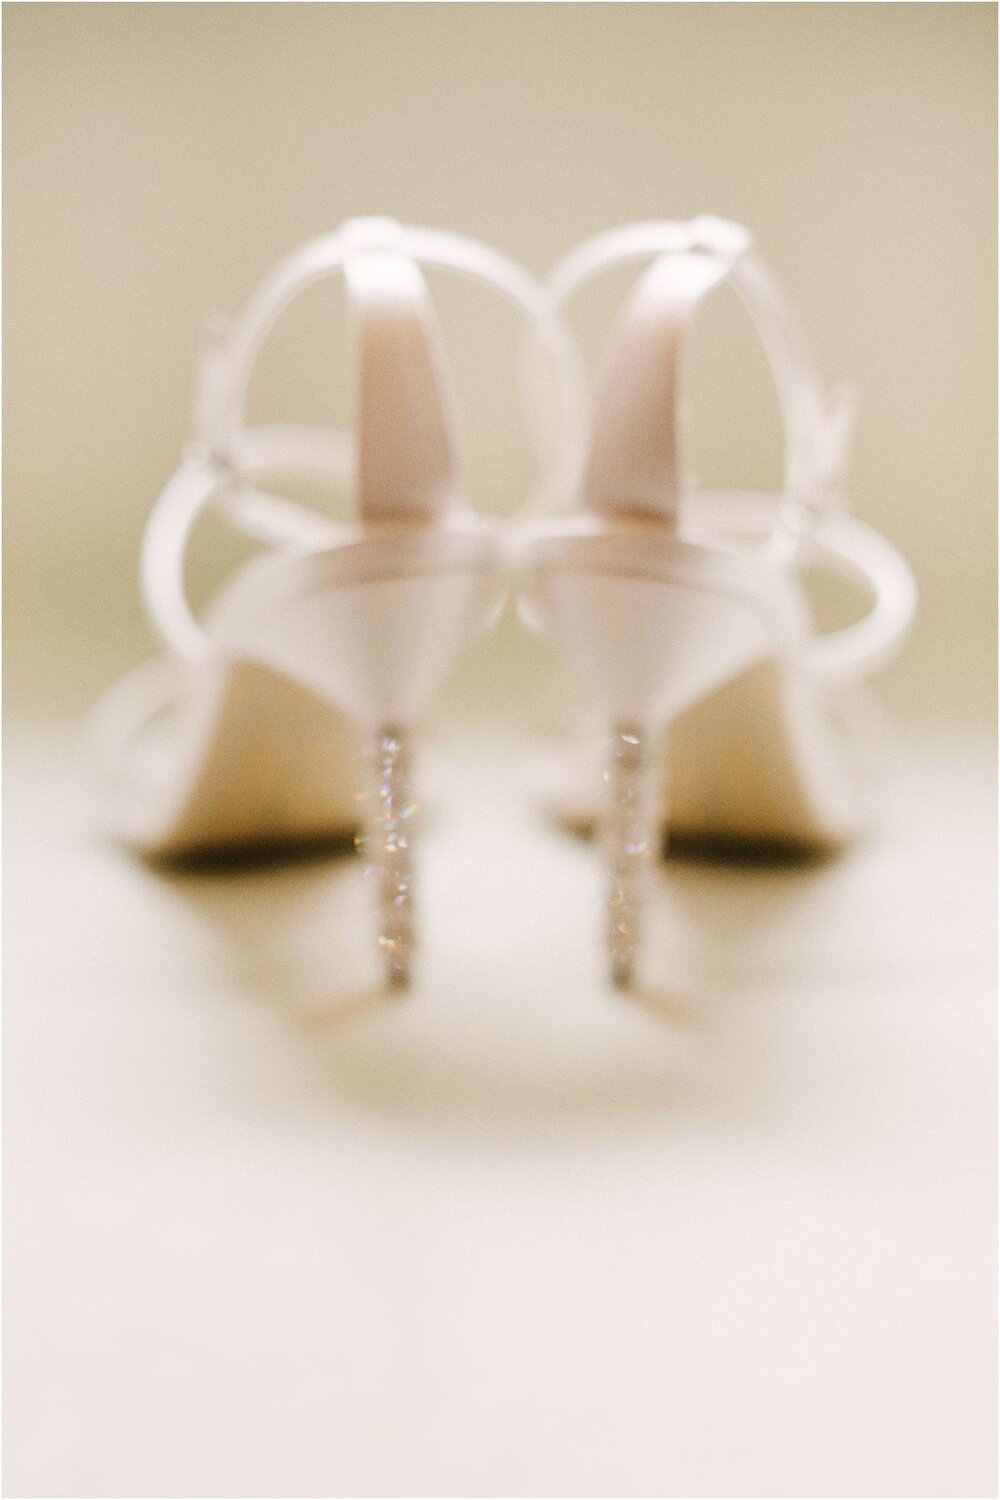  Sophia Webster bridal shoes during English Countryside wedding at The Ashes Barns in Staffordshire with Classic white and green theme 